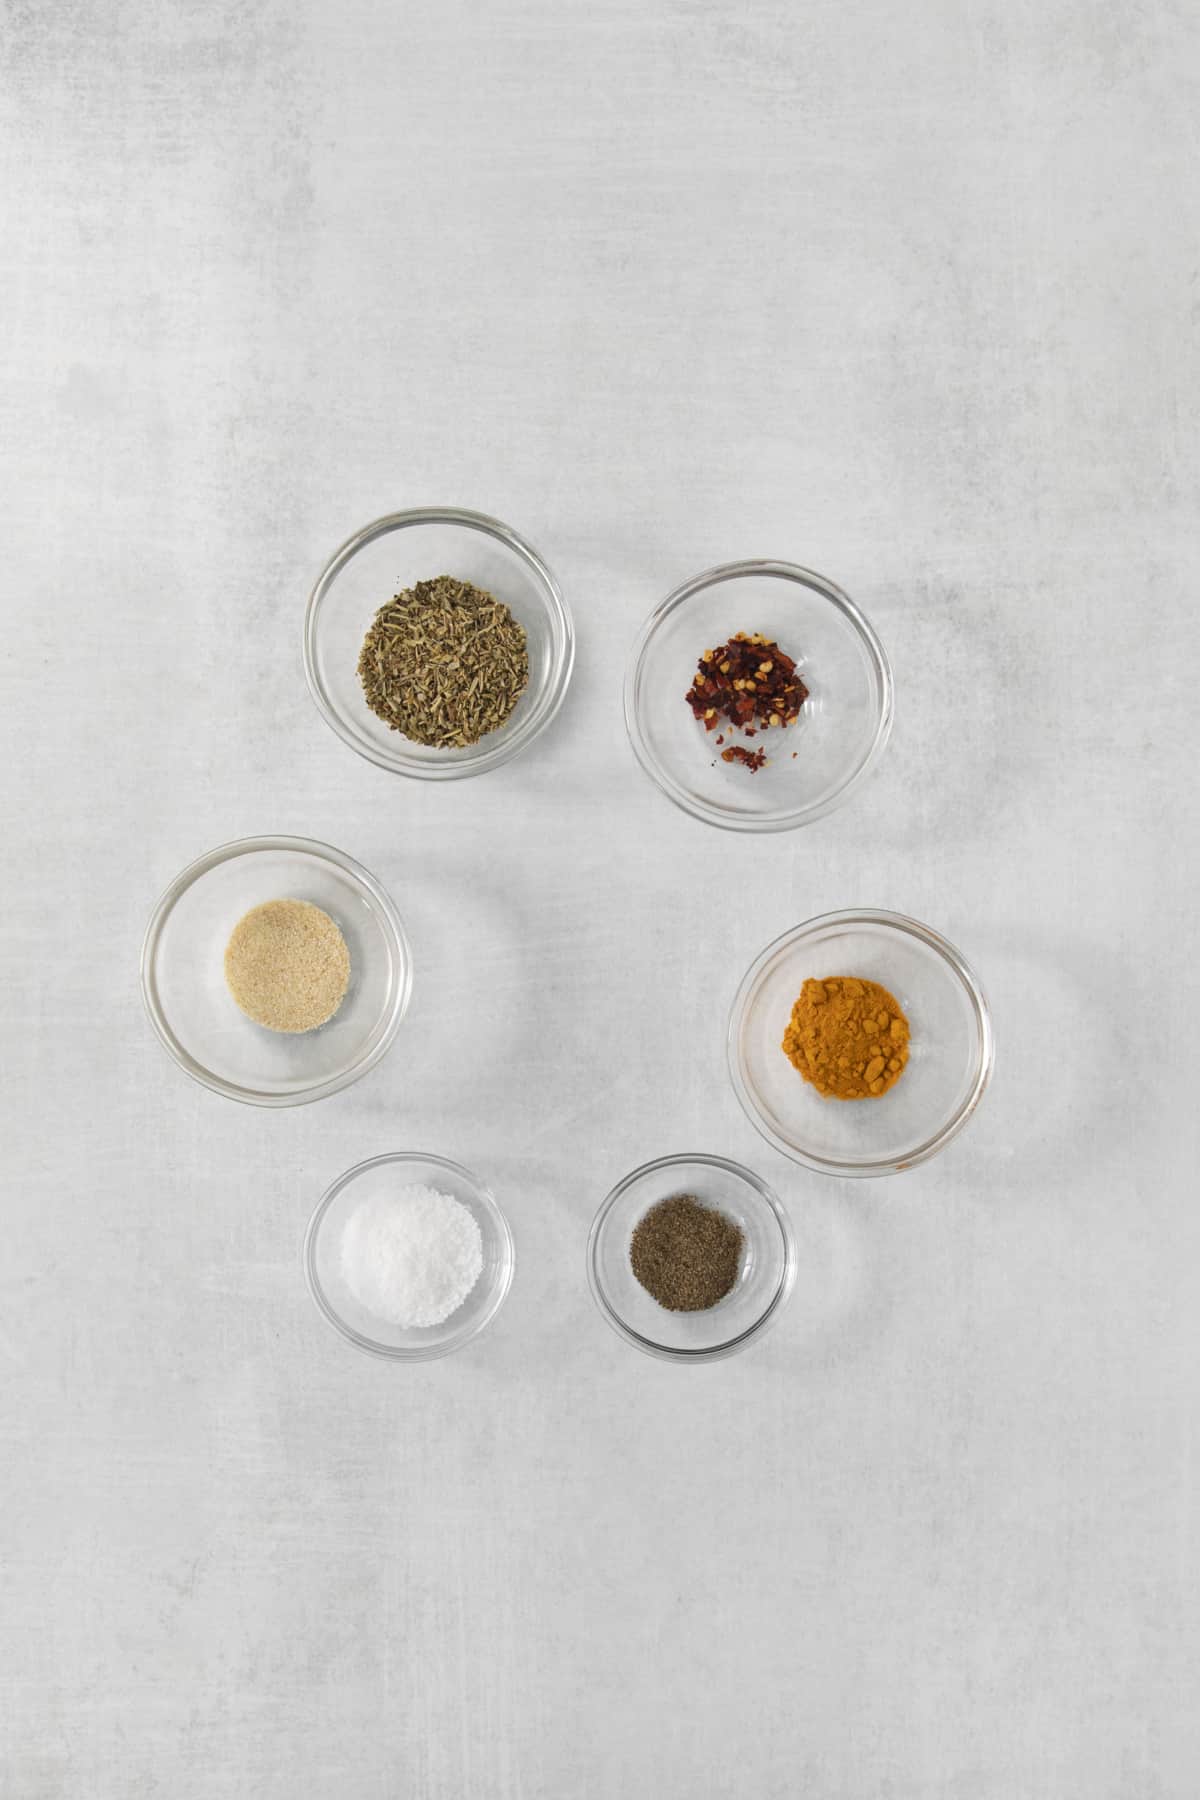 overhead of different bowls with spice rub seasonings.